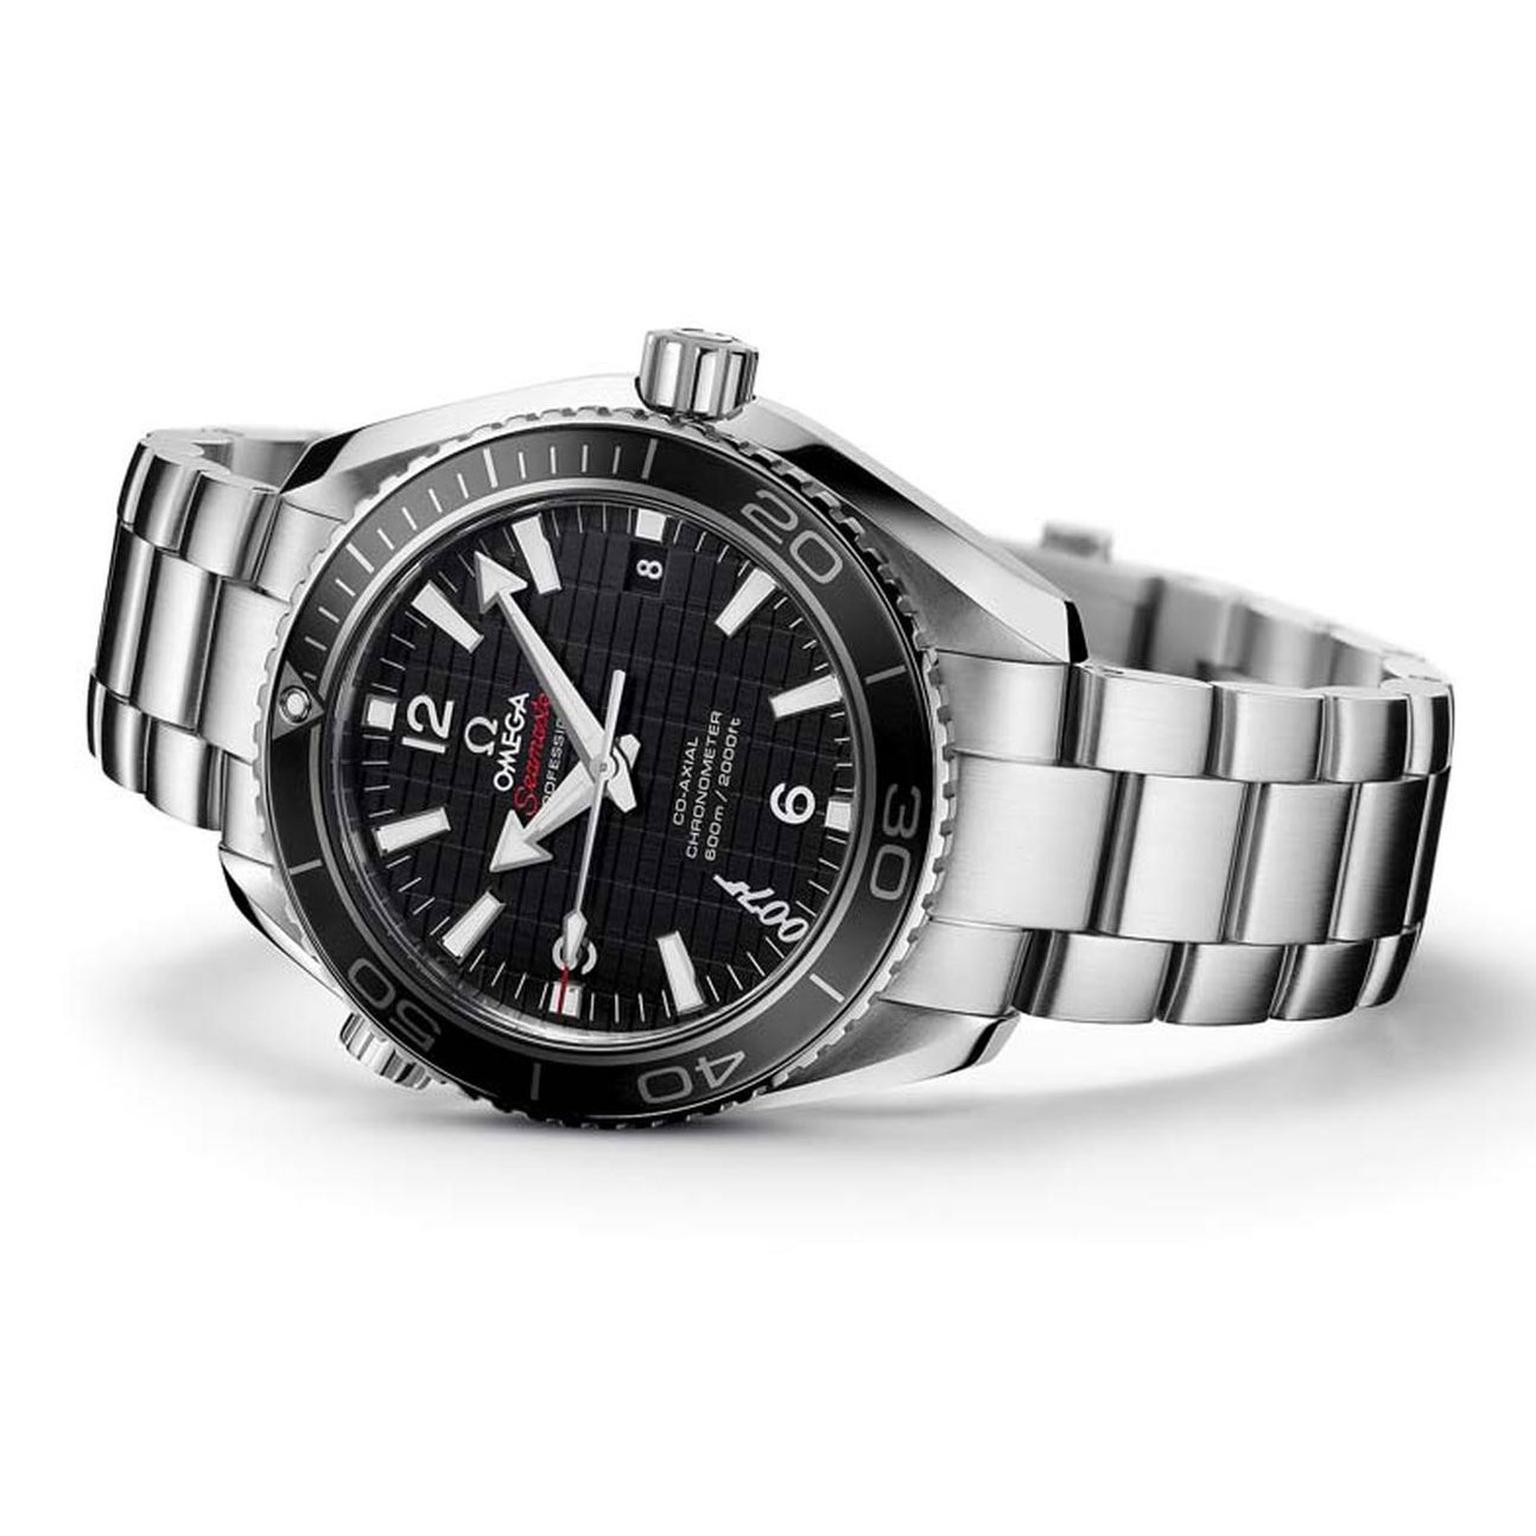 Omega's 42mm Planet Ocean 600m with Co-Axial movement, as seen in the 2012 James Bond film Skyfall starring Daniel Craig, is one of two Omega watches featured in the film.